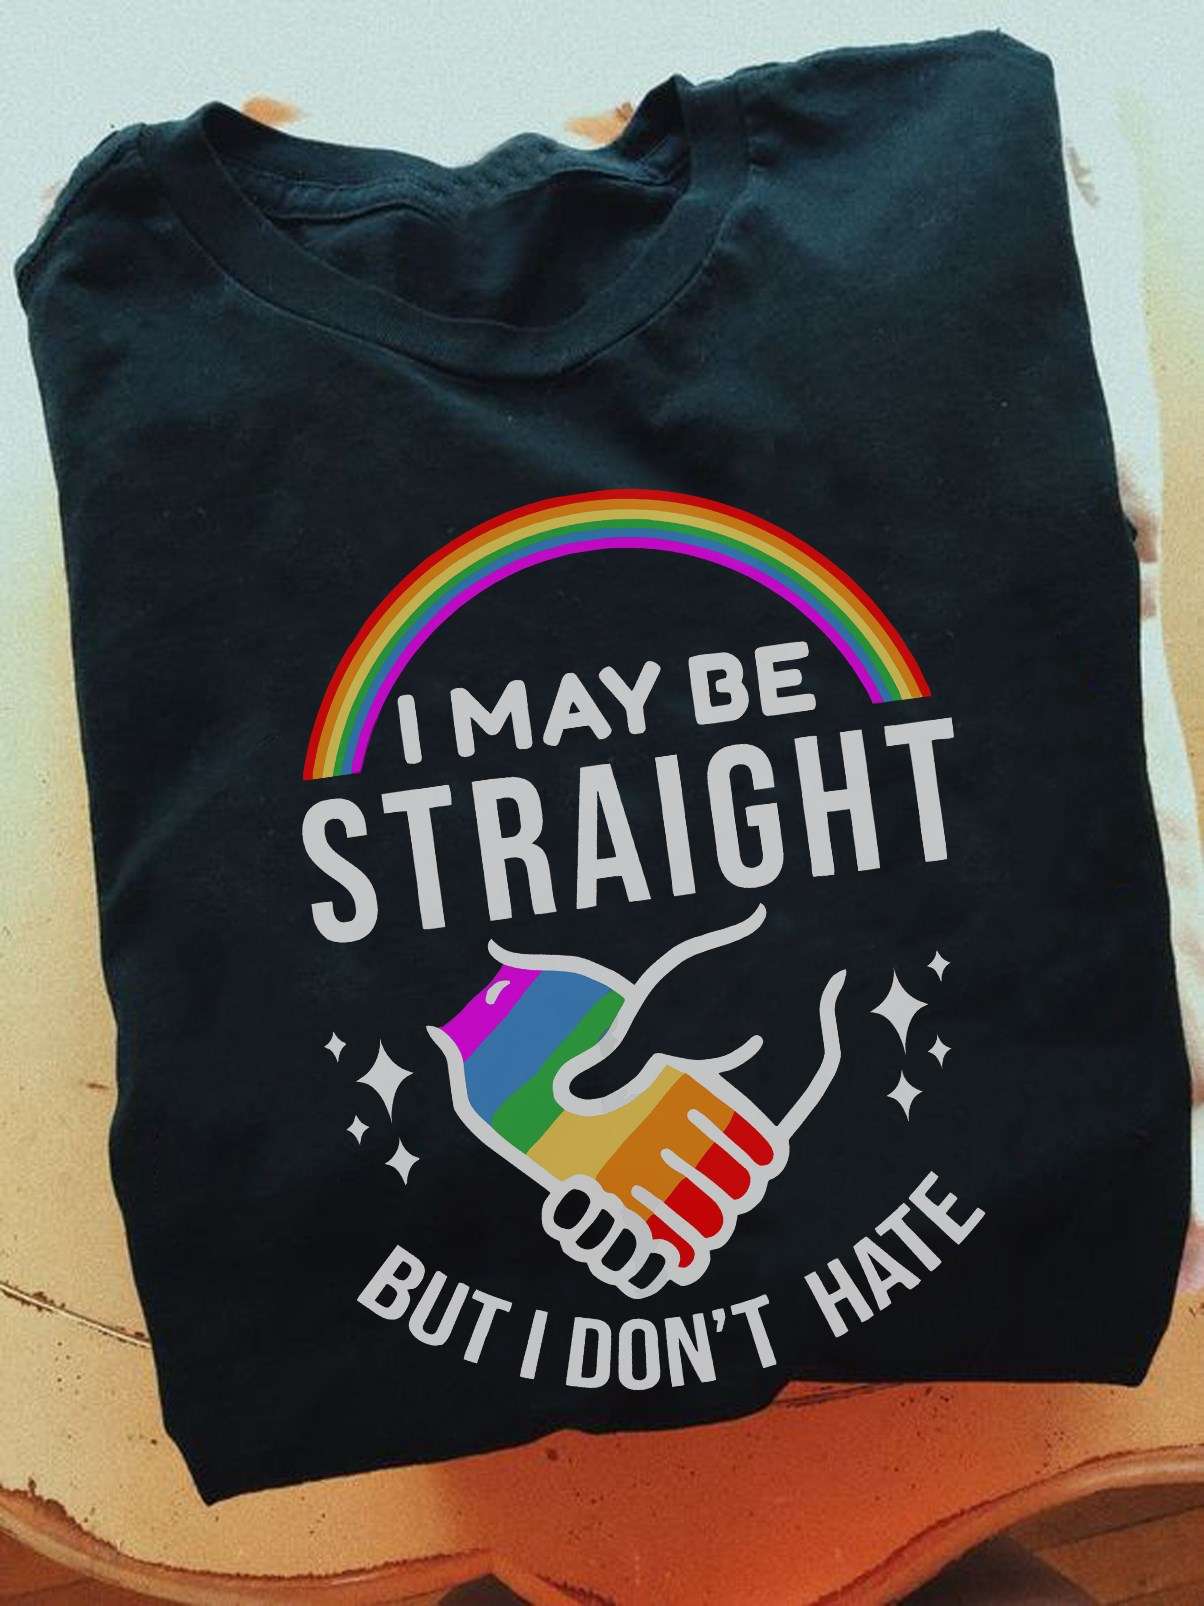 LGBT Hand - I may be straight but i don't hate